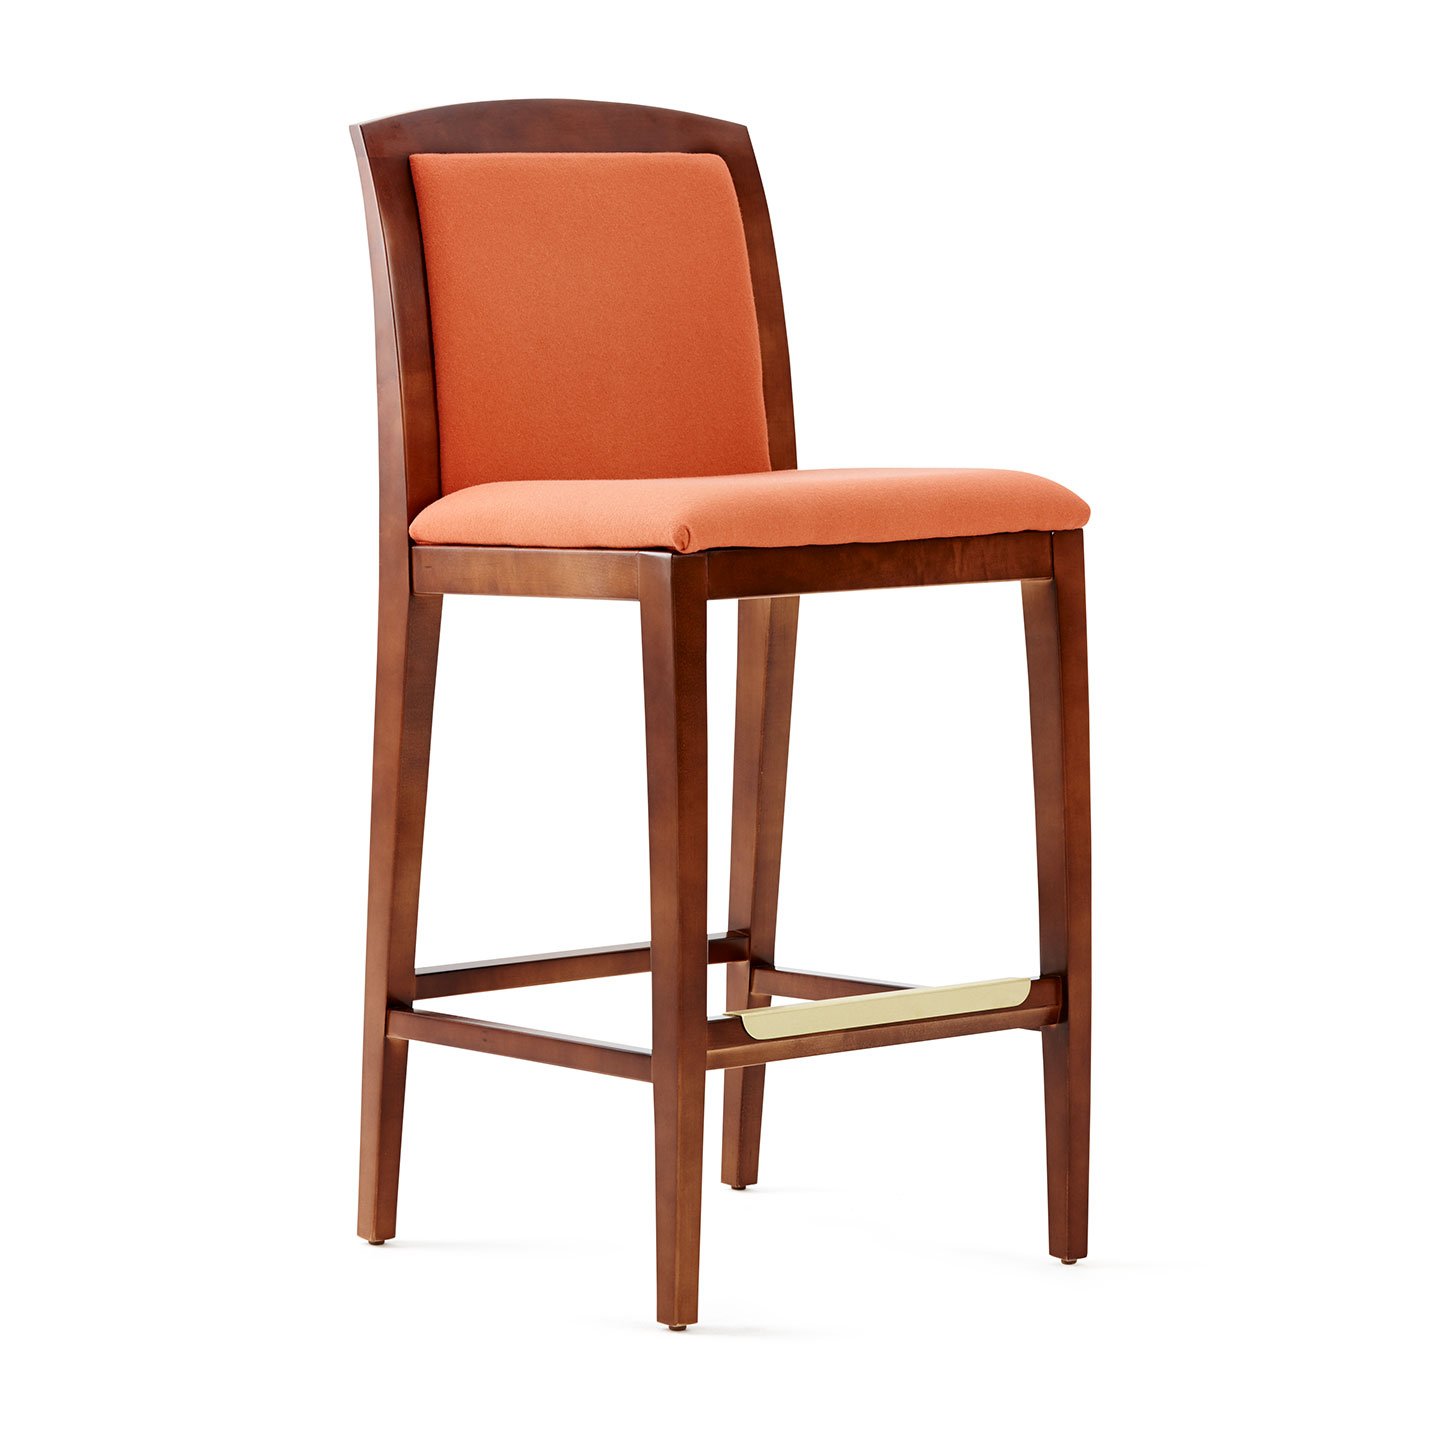 Haworth Composites stool in orange fabric, dark wood body and legs seen from an angle